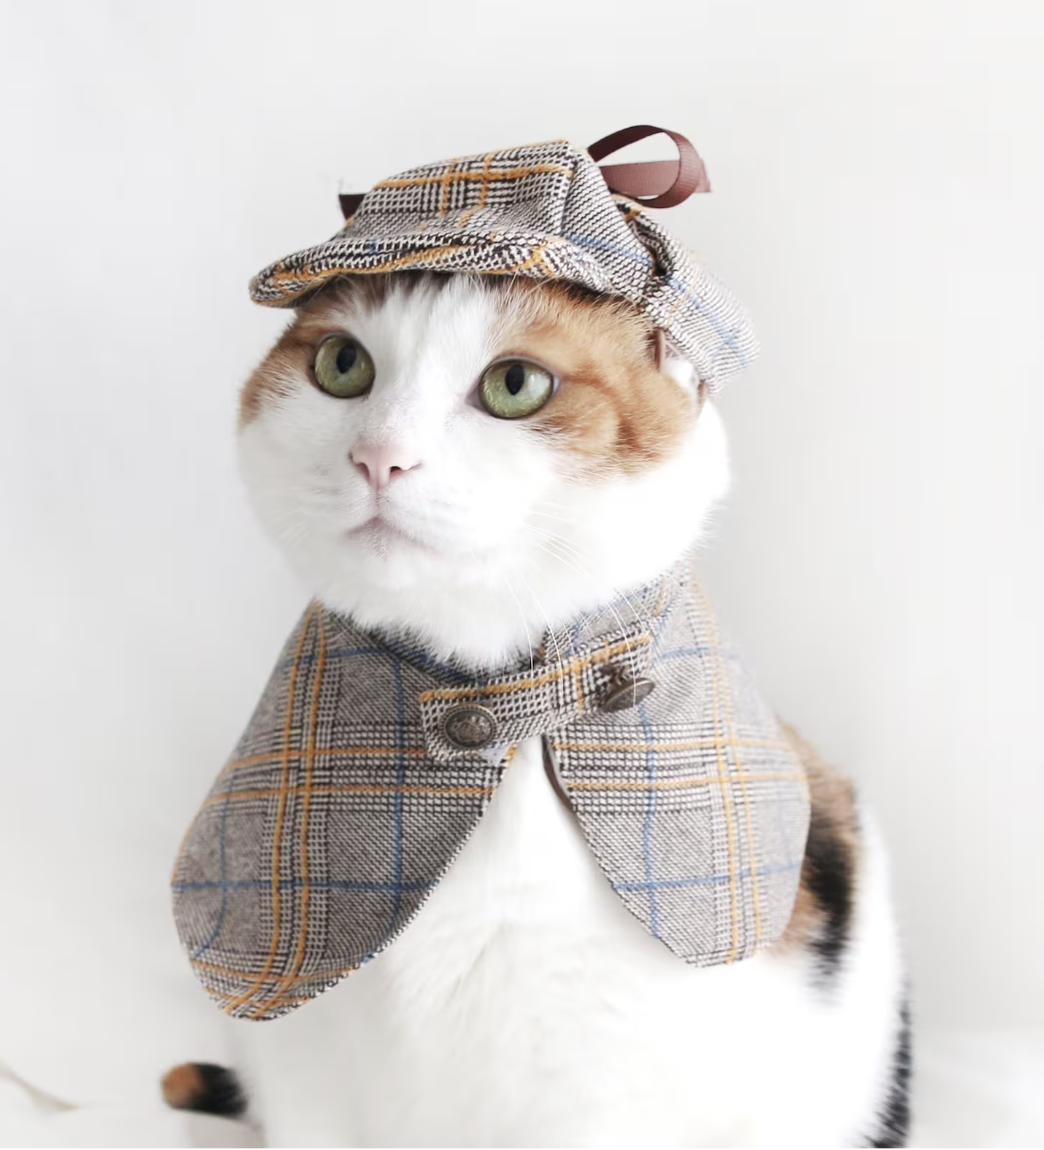 A white and orange cat posing very politely in a Sherlock Holmes style cap and hat